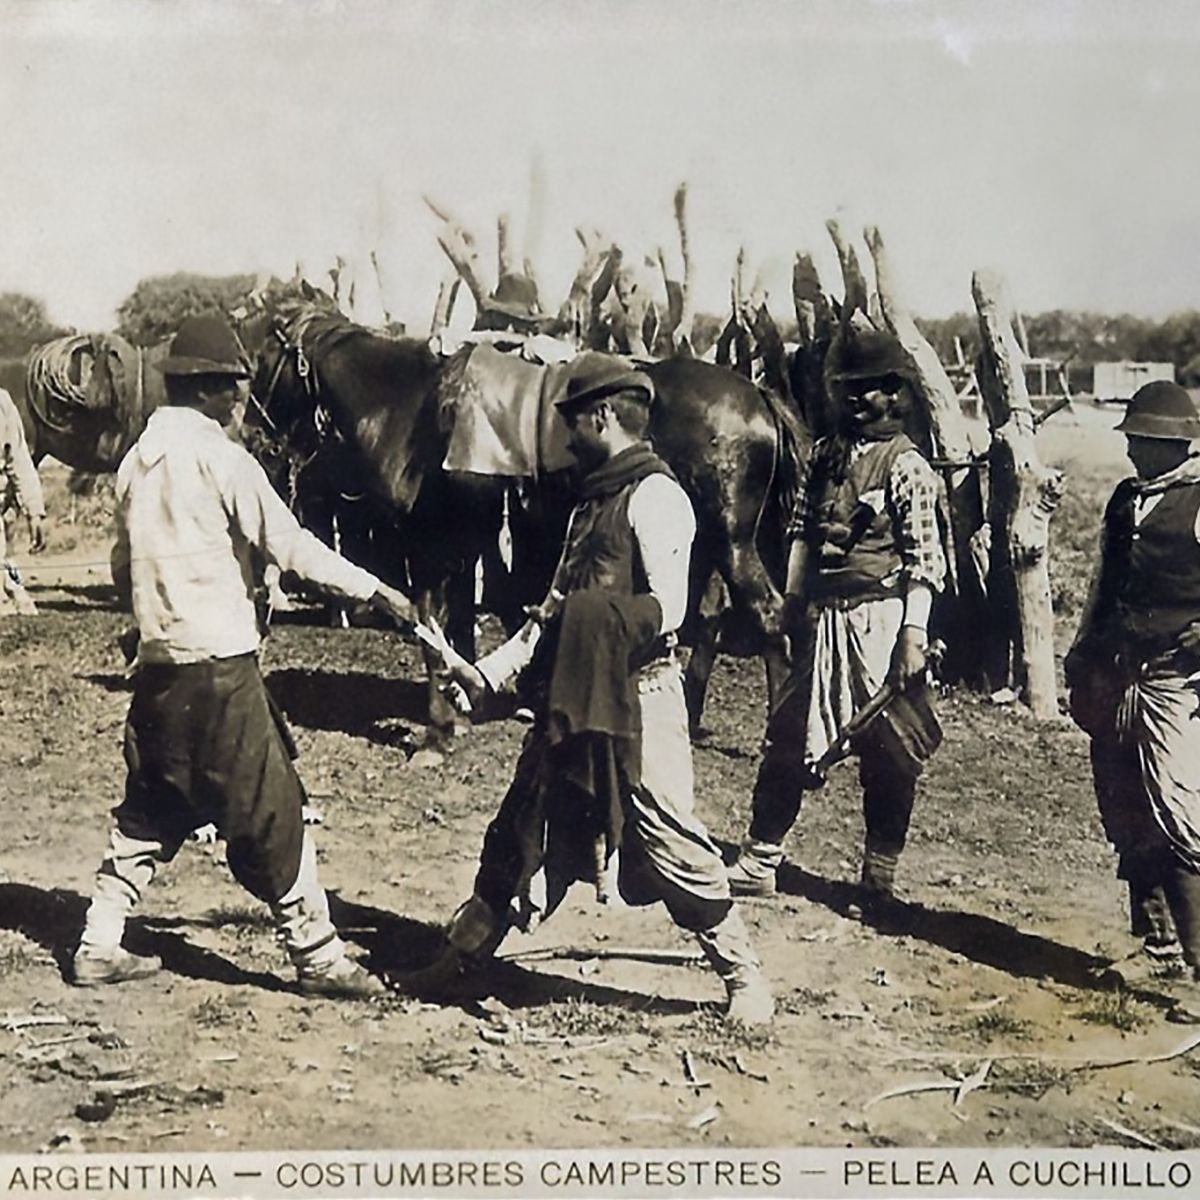 Knight fight, gaucho sport in Argentina, tow men fighting with horses and witnesses in the back